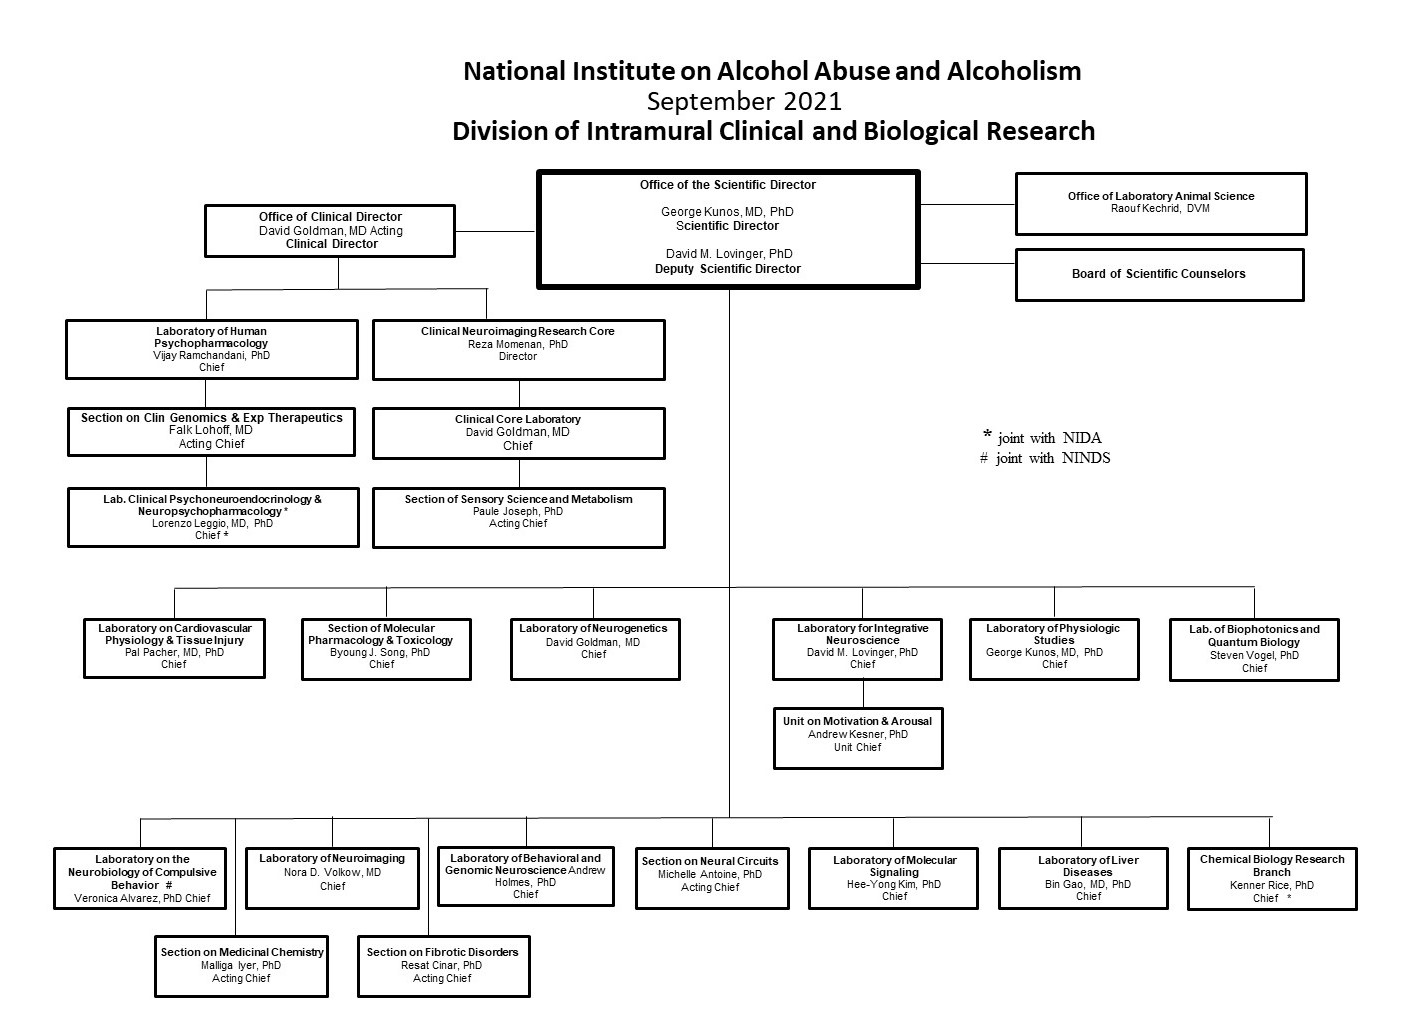 NIAAA DICBR Organizational Chart.   An accessible text version is under full text